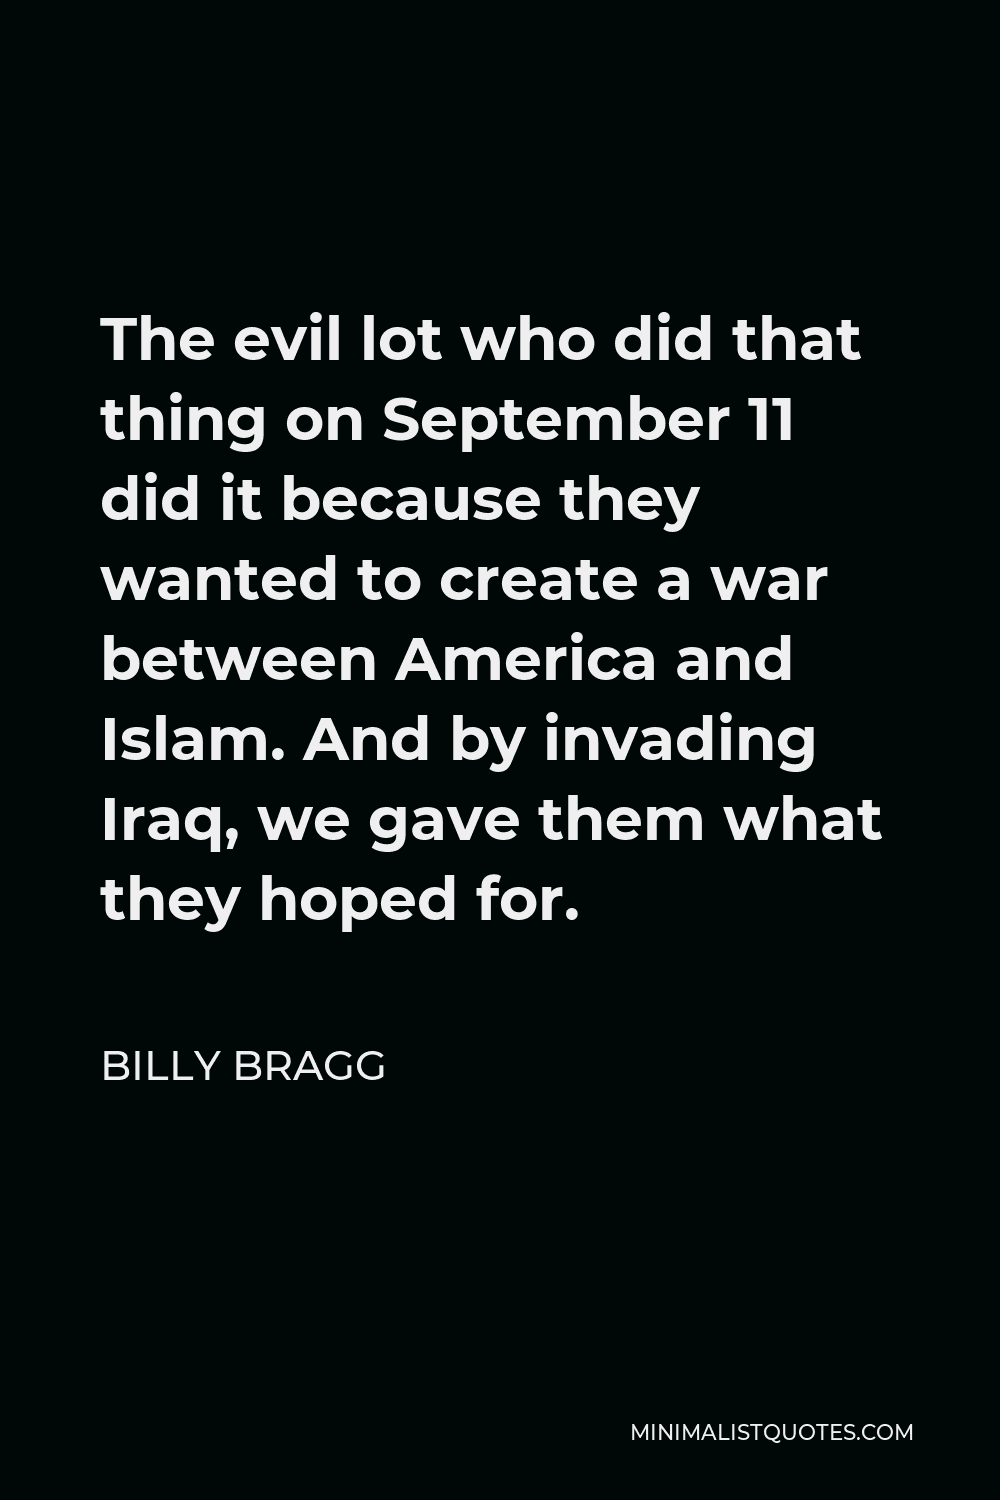 Billy Bragg Quote - The evil lot who did that thing on September 11 did it because they wanted to create a war between America and Islam. And by invading Iraq, we gave them what they hoped for.